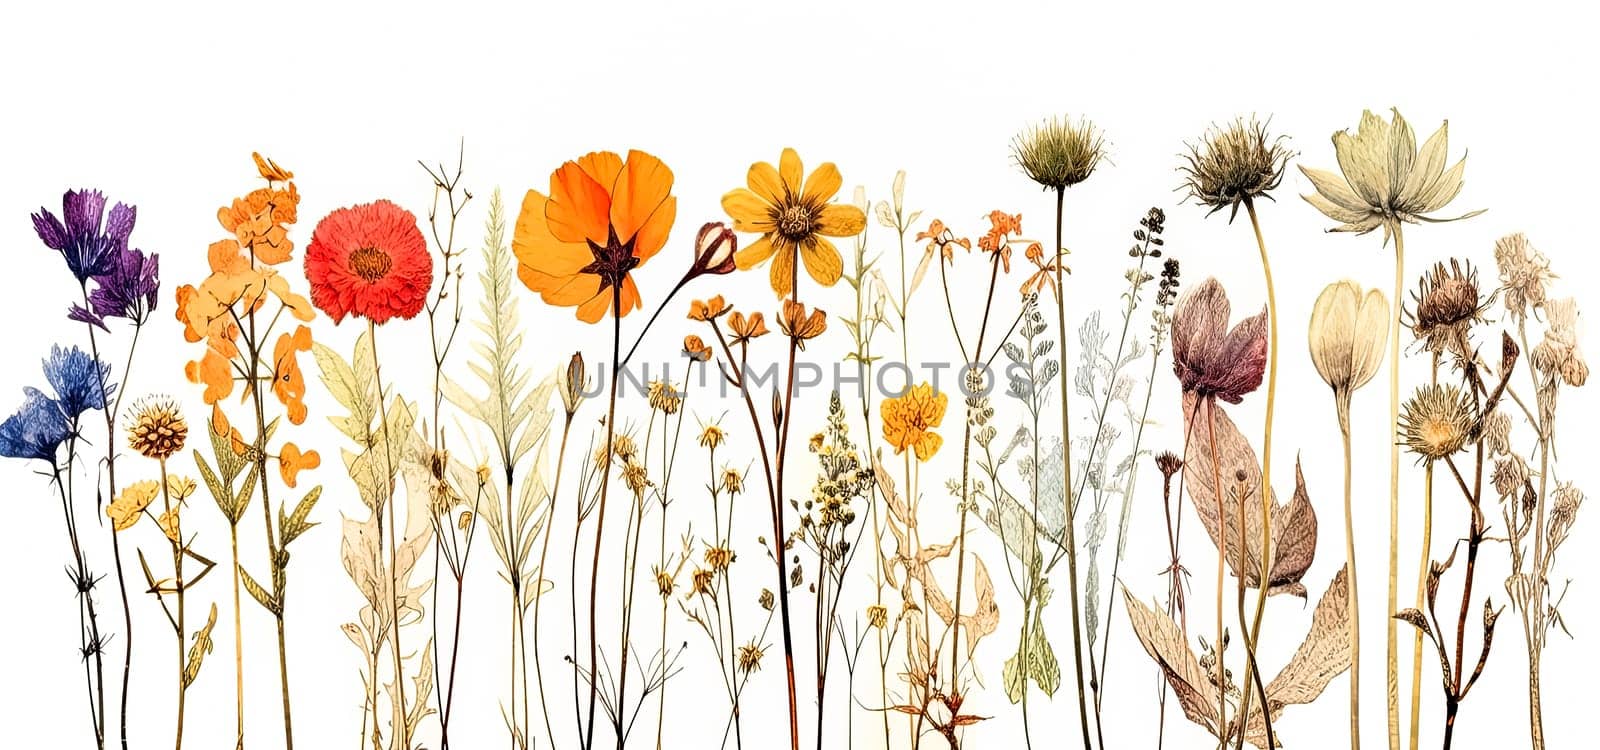 A stunning set of beautiful dried meadow flowers showcased against a white background. Perfect for various design projects and floral arrangements.